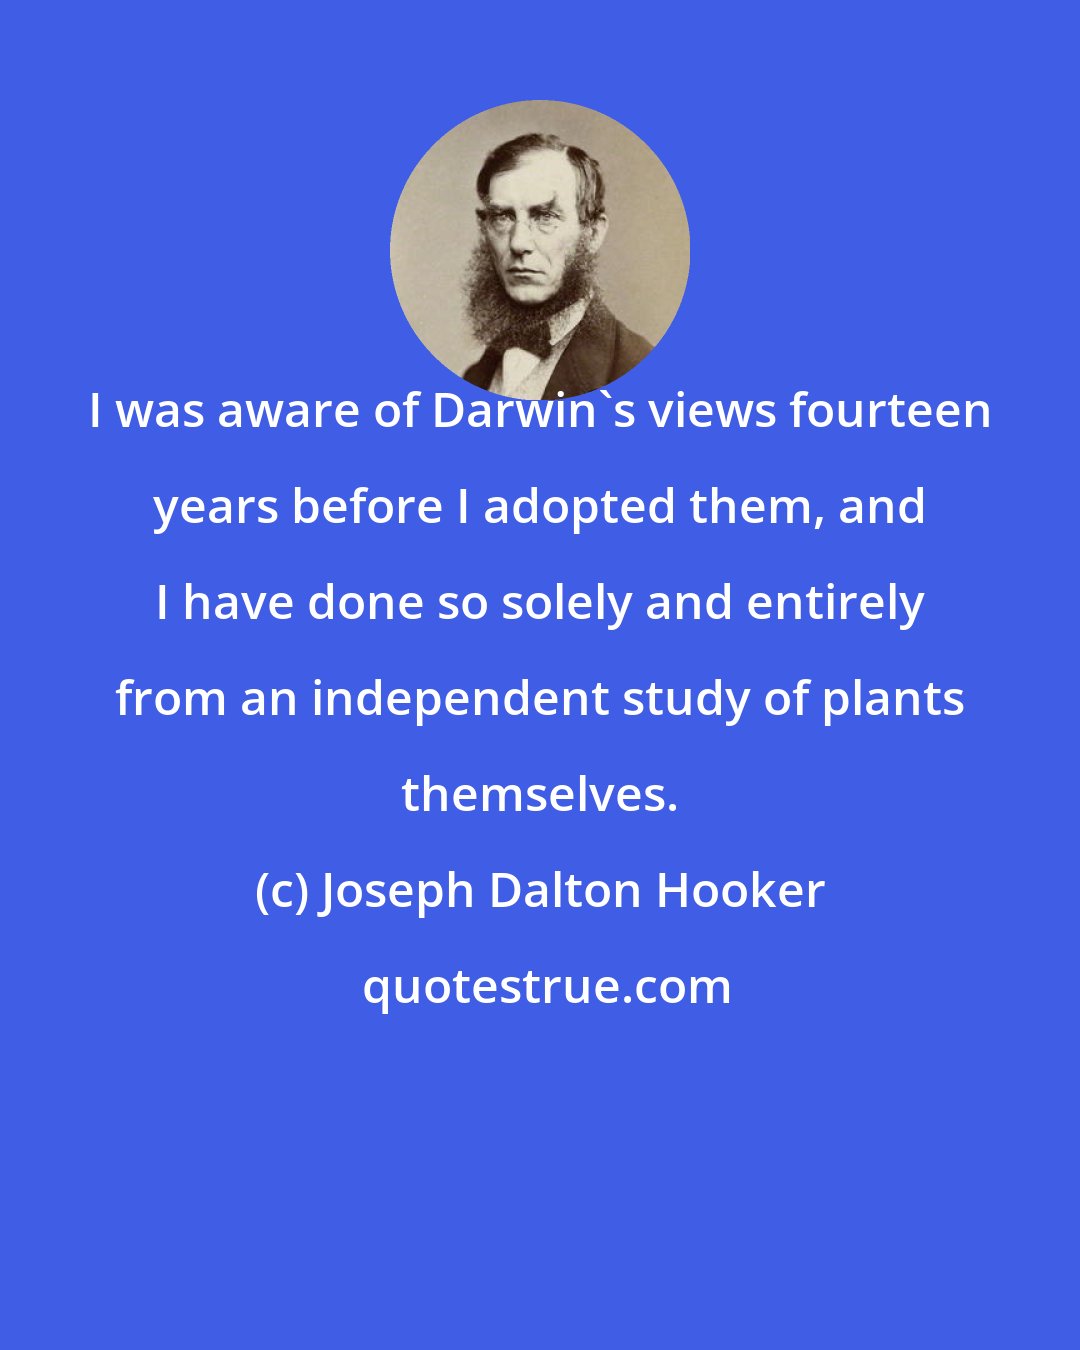 Joseph Dalton Hooker: I was aware of Darwin's views fourteen years before I adopted them, and I have done so solely and entirely from an independent study of plants themselves.